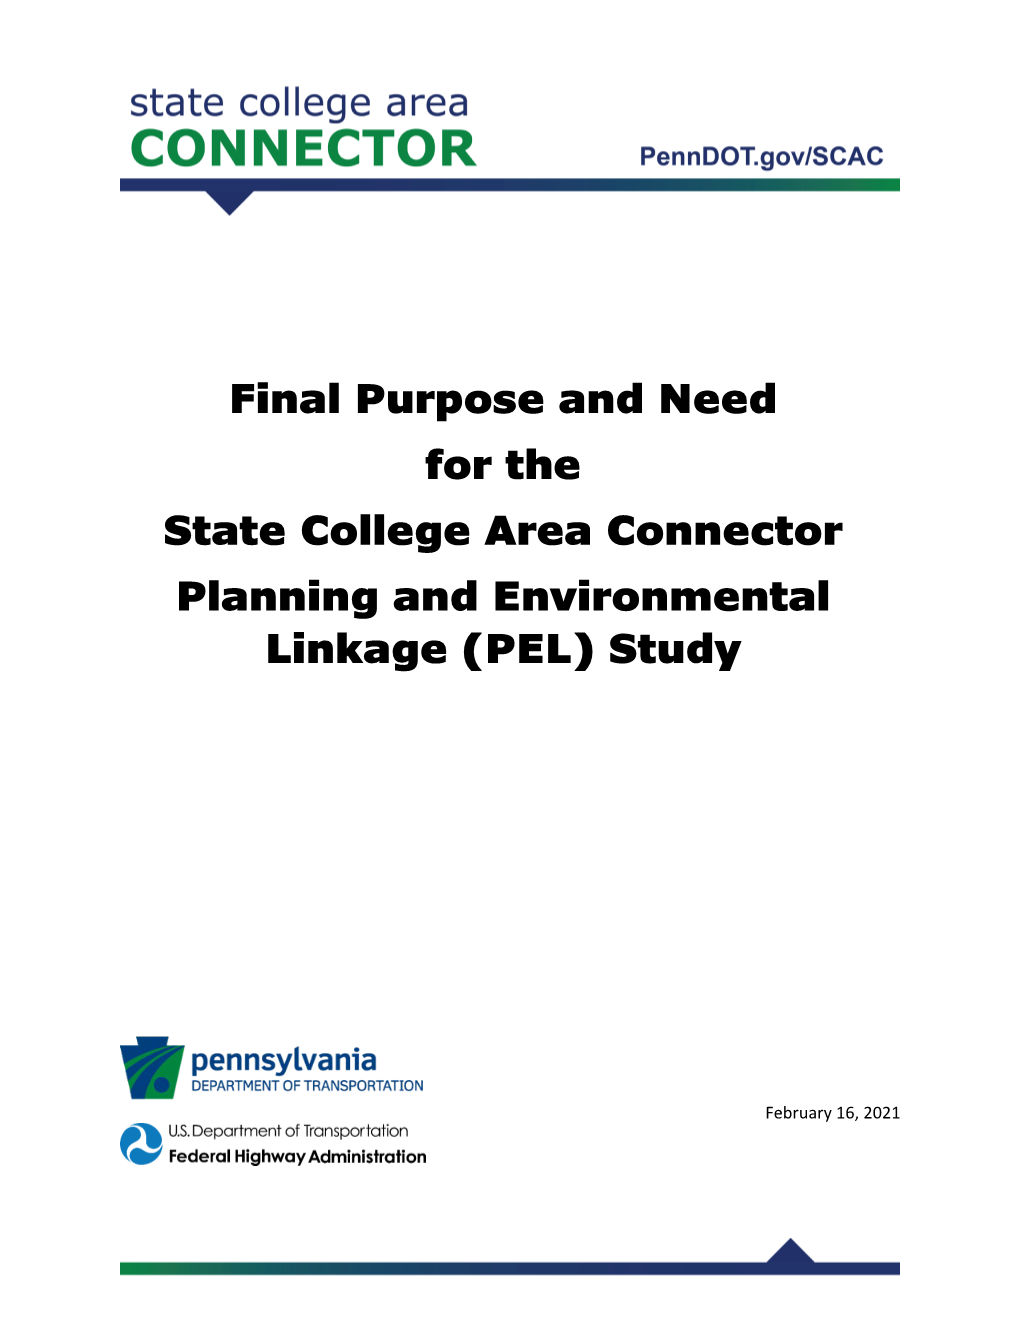 Final Purpose and Need for the State College Area Connector Planning and Environmental Linkage (PEL) Study